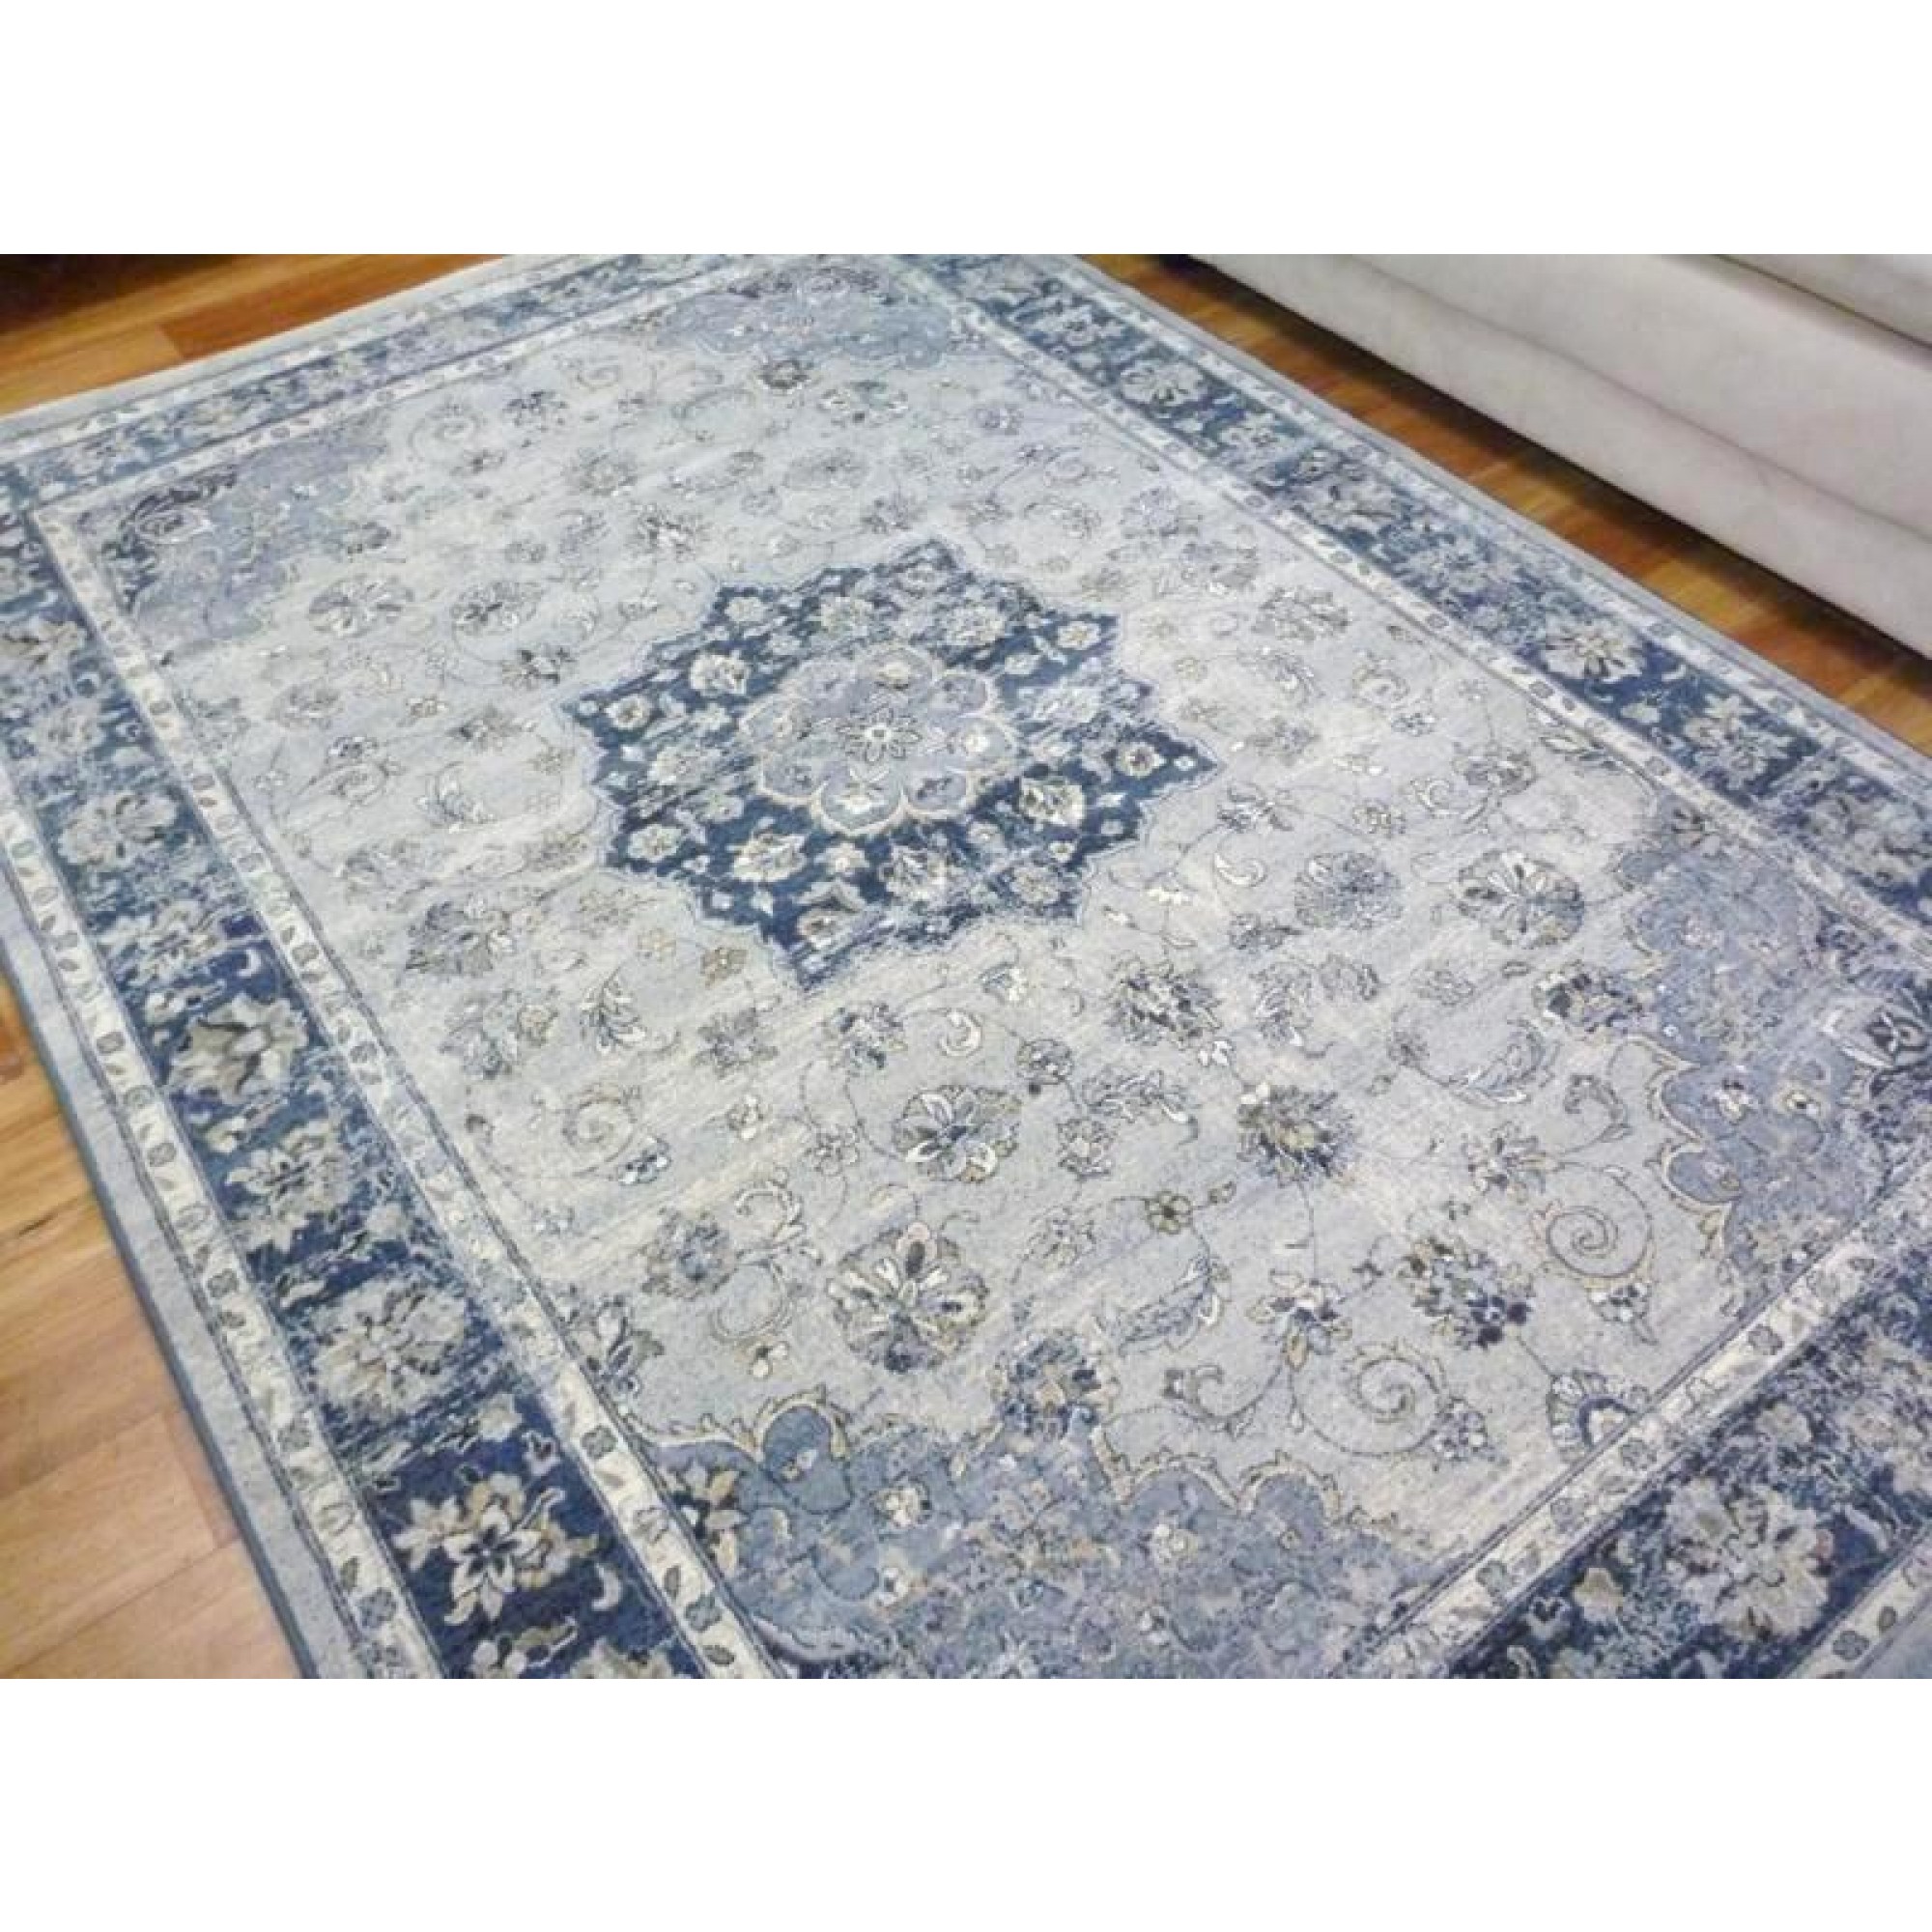 quality rugs soft high quality persian look design floor area rugs elite washed pale FHXENAT